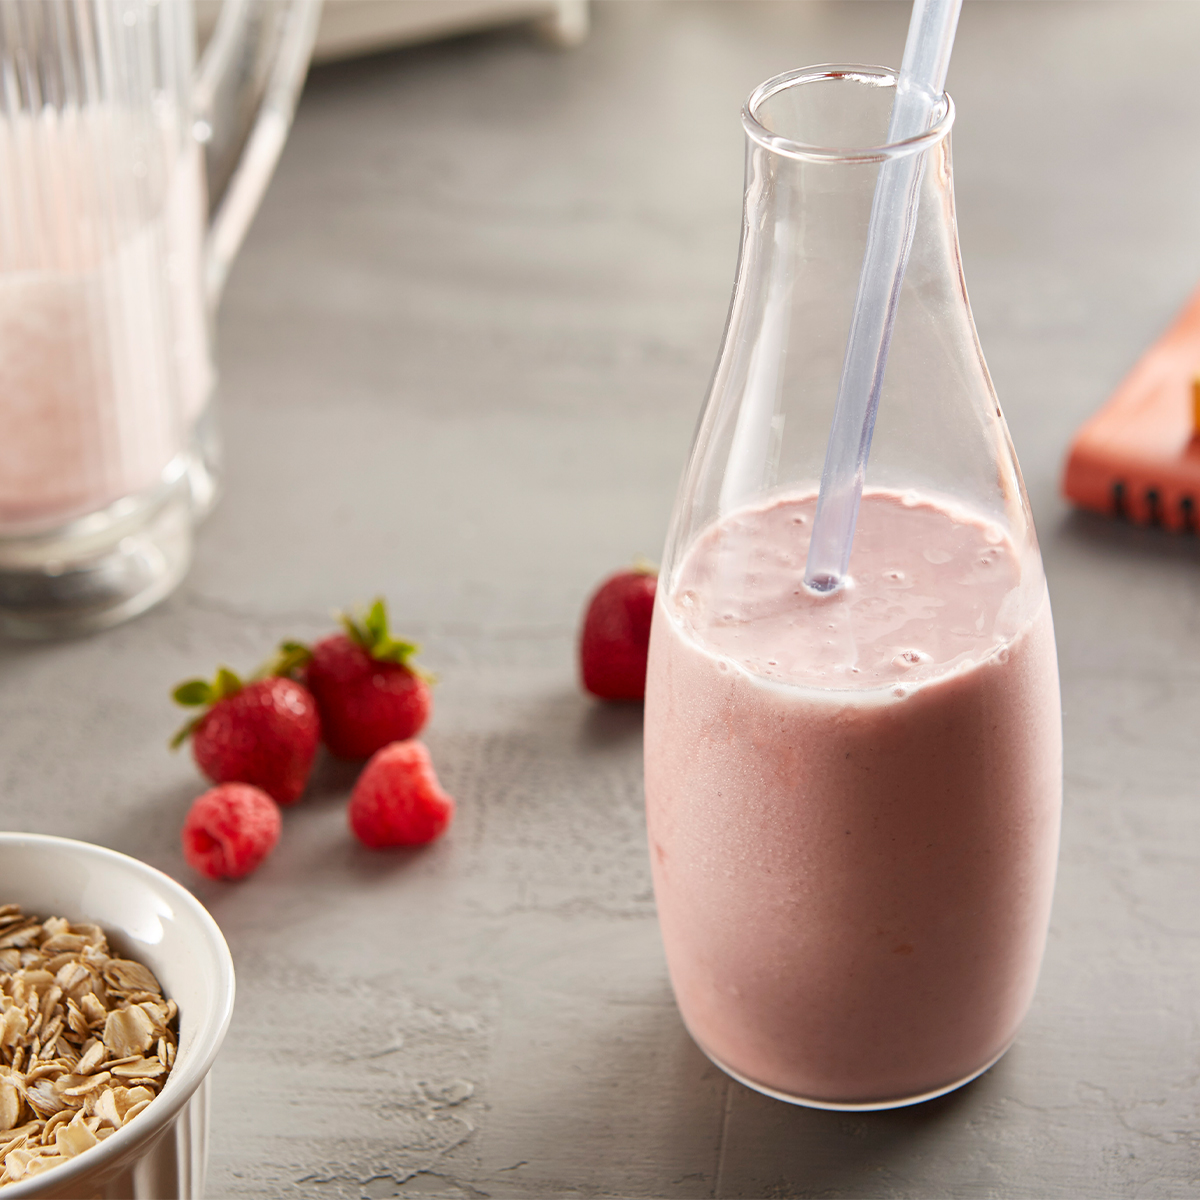 Oat-Pear-Berry Smoothie